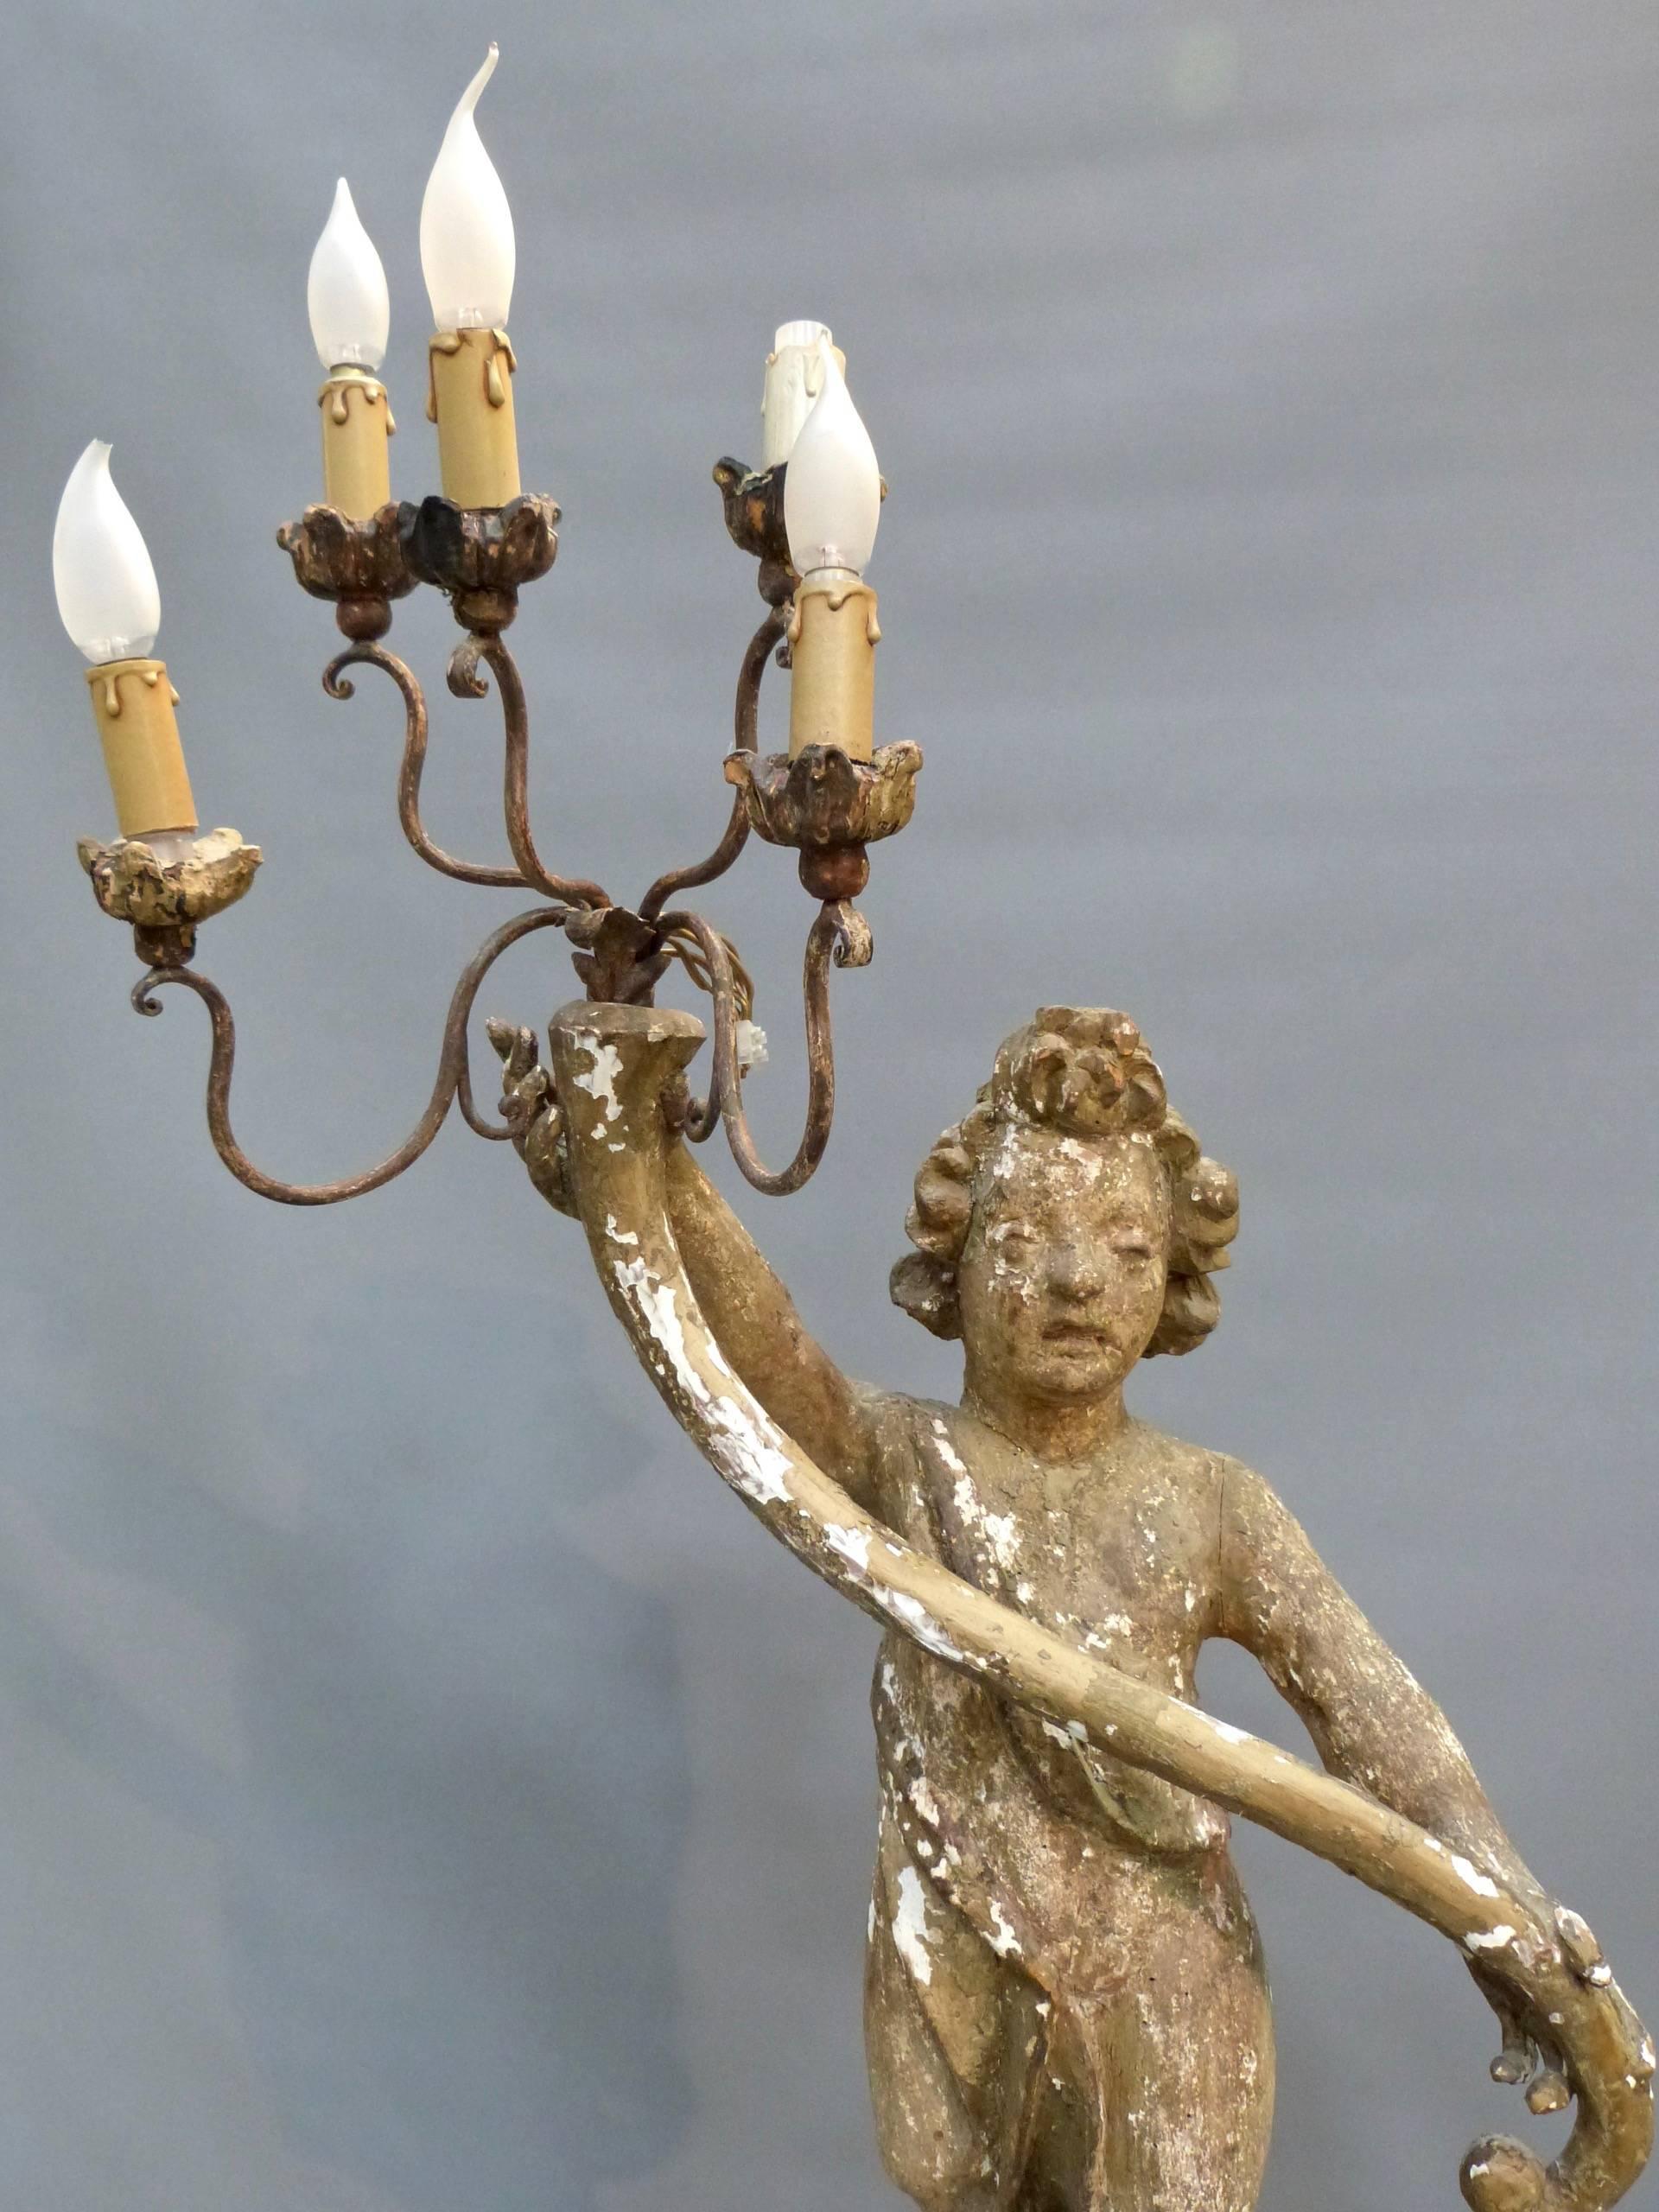 A rare and unrestored late 17th century Italian carved pine or limewood floor standing candelabra. It has its original candle arms which have been electrified at some stage. The Piece although it is in its original condition it is sound in